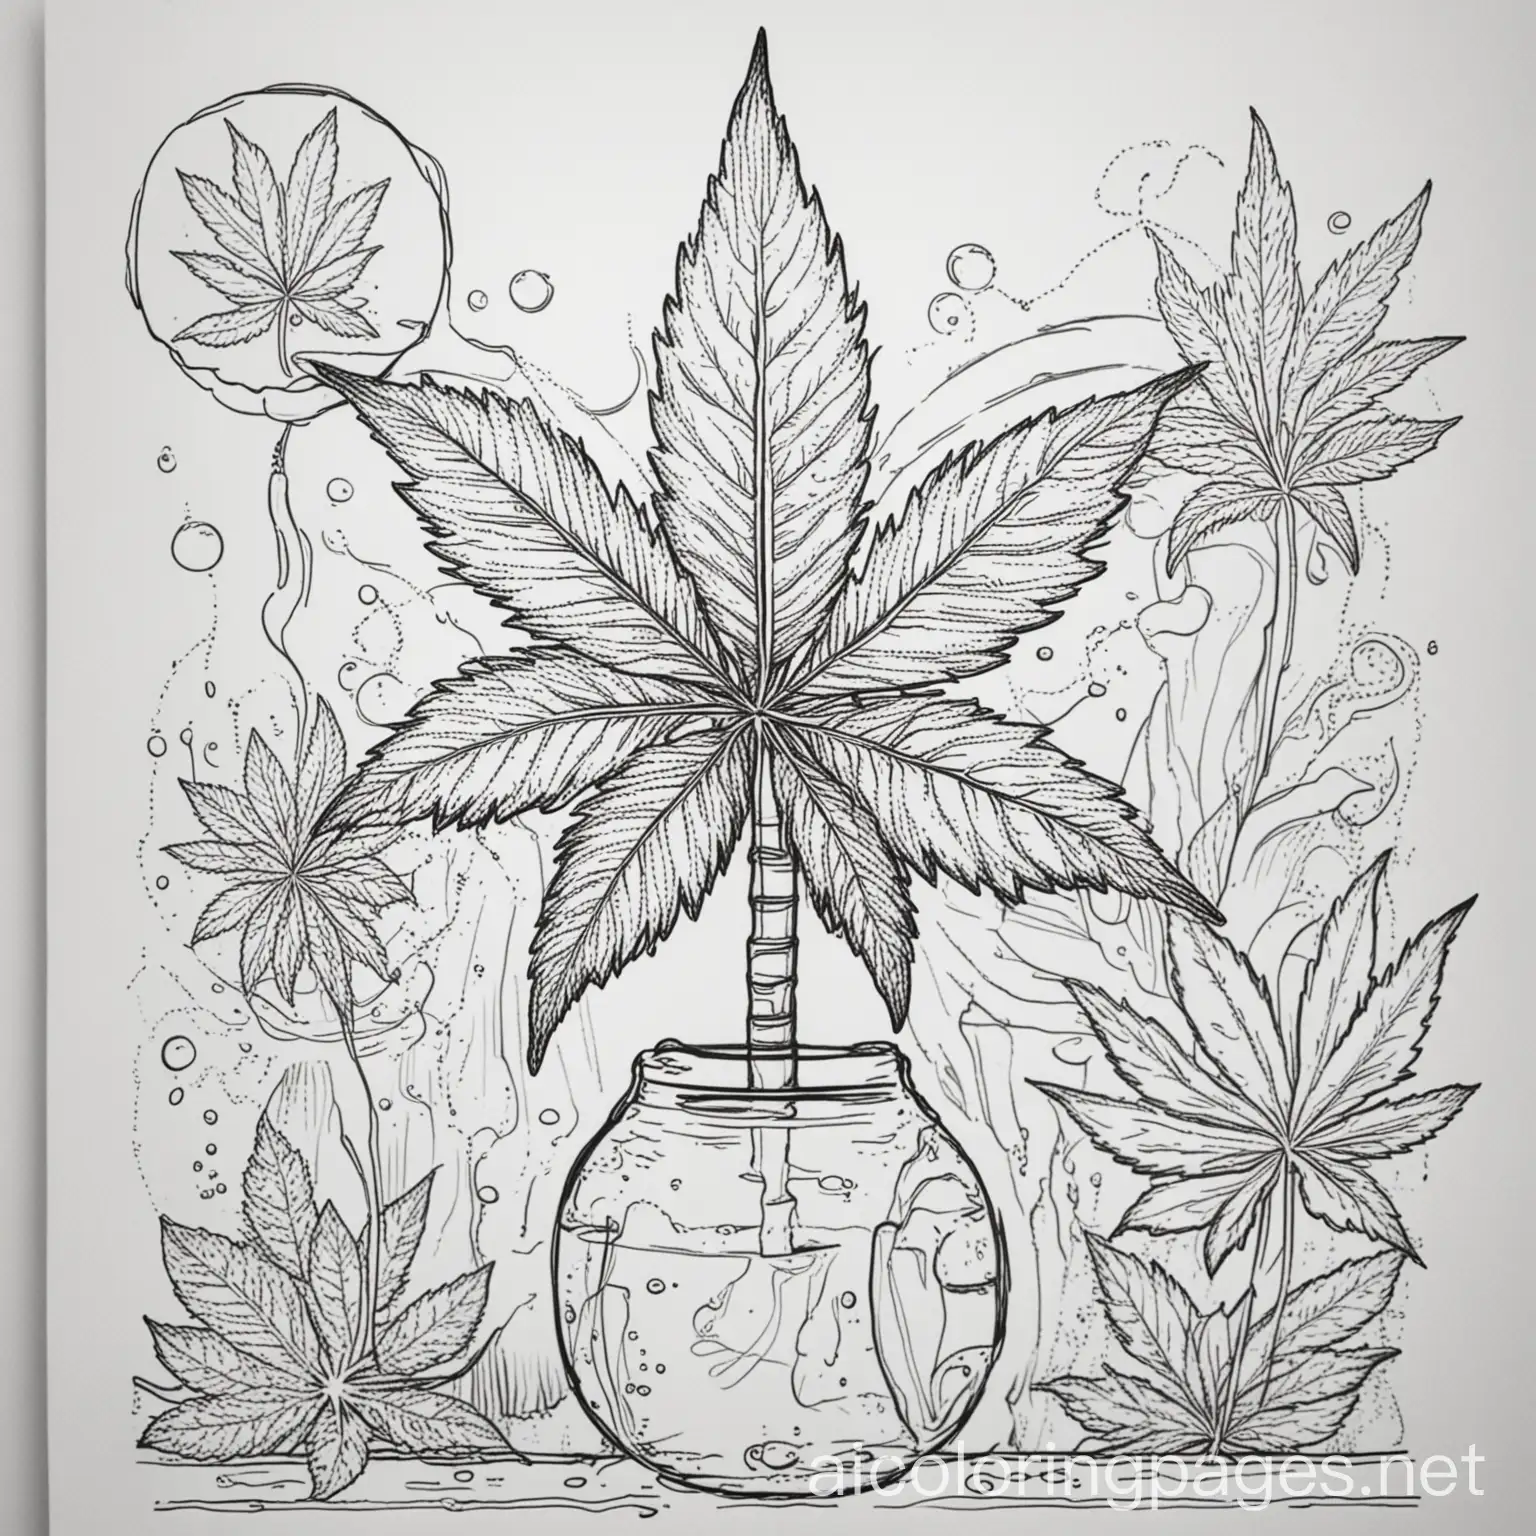 Sketch 420 weed cannabis bong friendly coloring page, Coloring Page, black and white, line art, white background, Simplicity, Ample White Space. The background of the coloring page is plain white to make it easy for young children to color within the lines. The outlines of all the subjects are easy to distinguish, making it simple for kids to color without too much difficulty